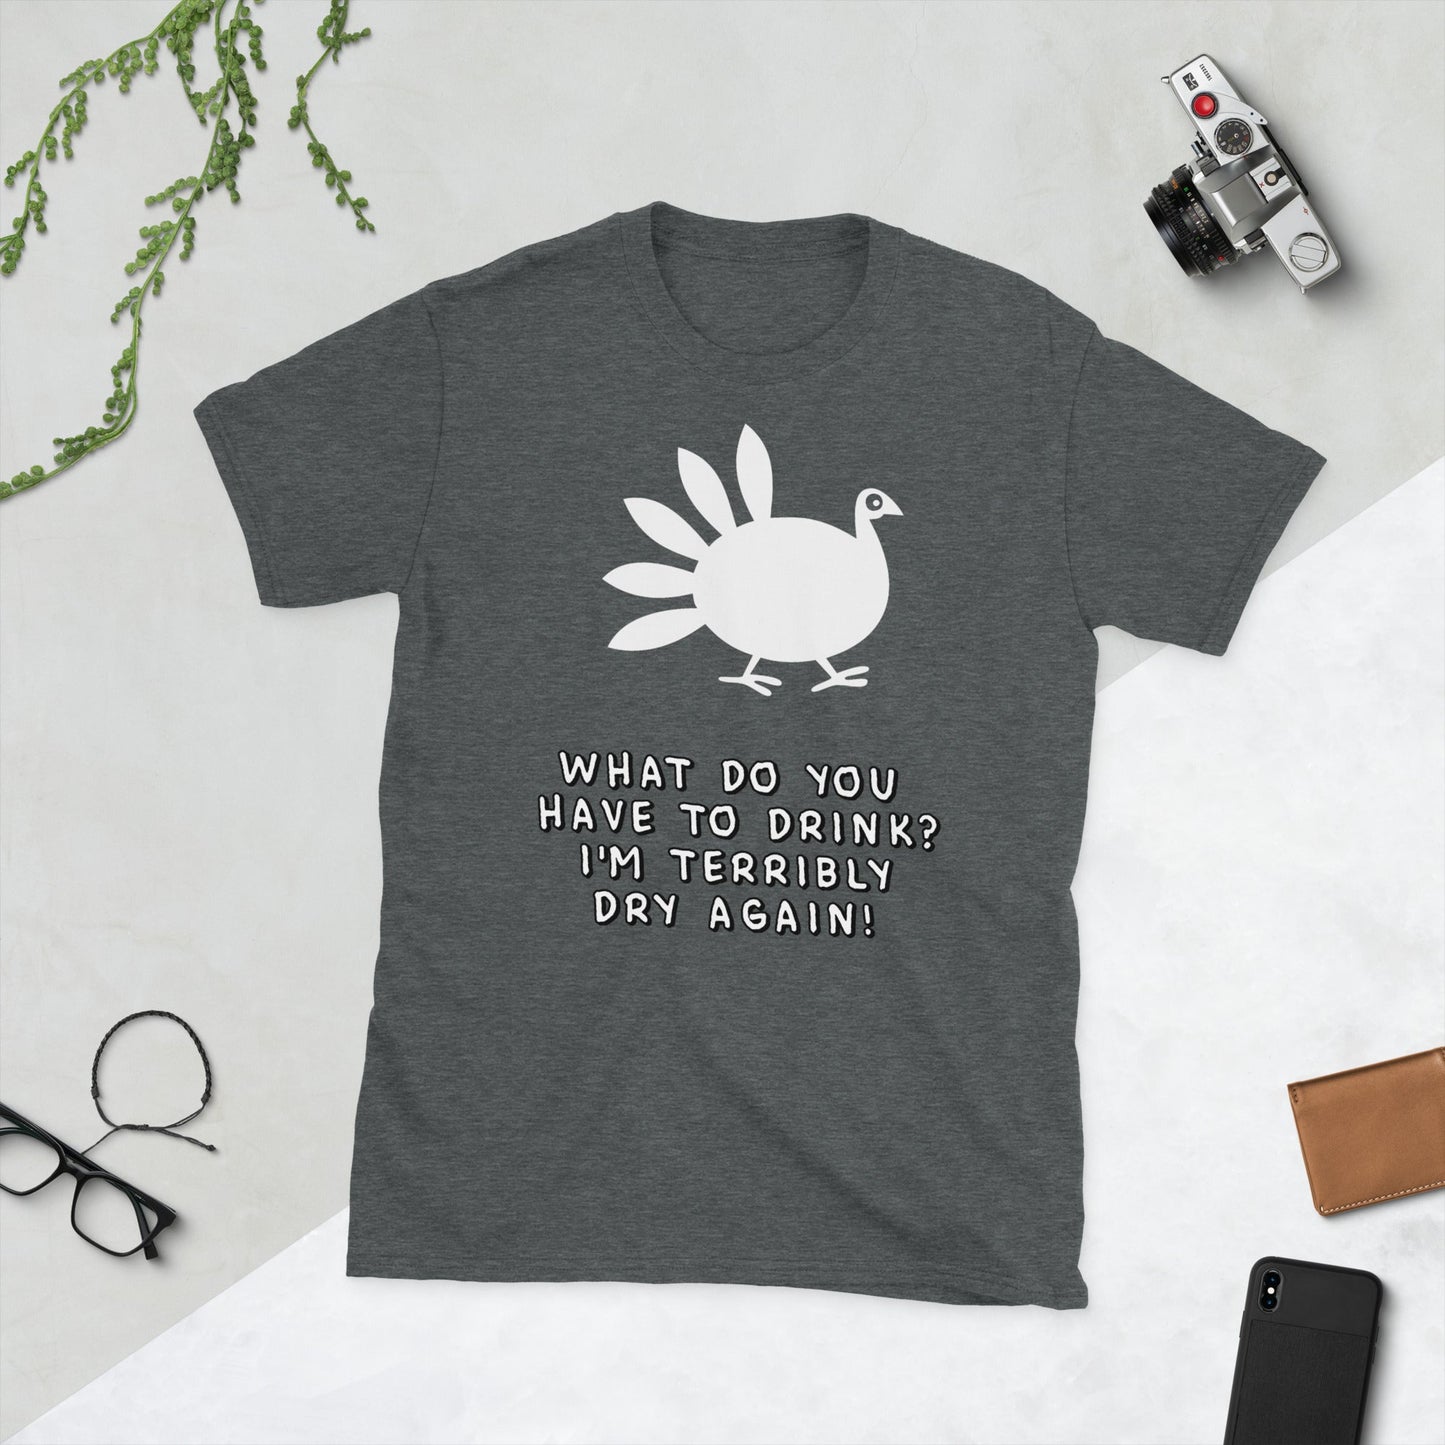 Thanksgiving Turkey What Do You Have To Drink? I'm Terribly Dry Again! Short-Sleeve Unisex T-Shirt - Lizard Vigilante